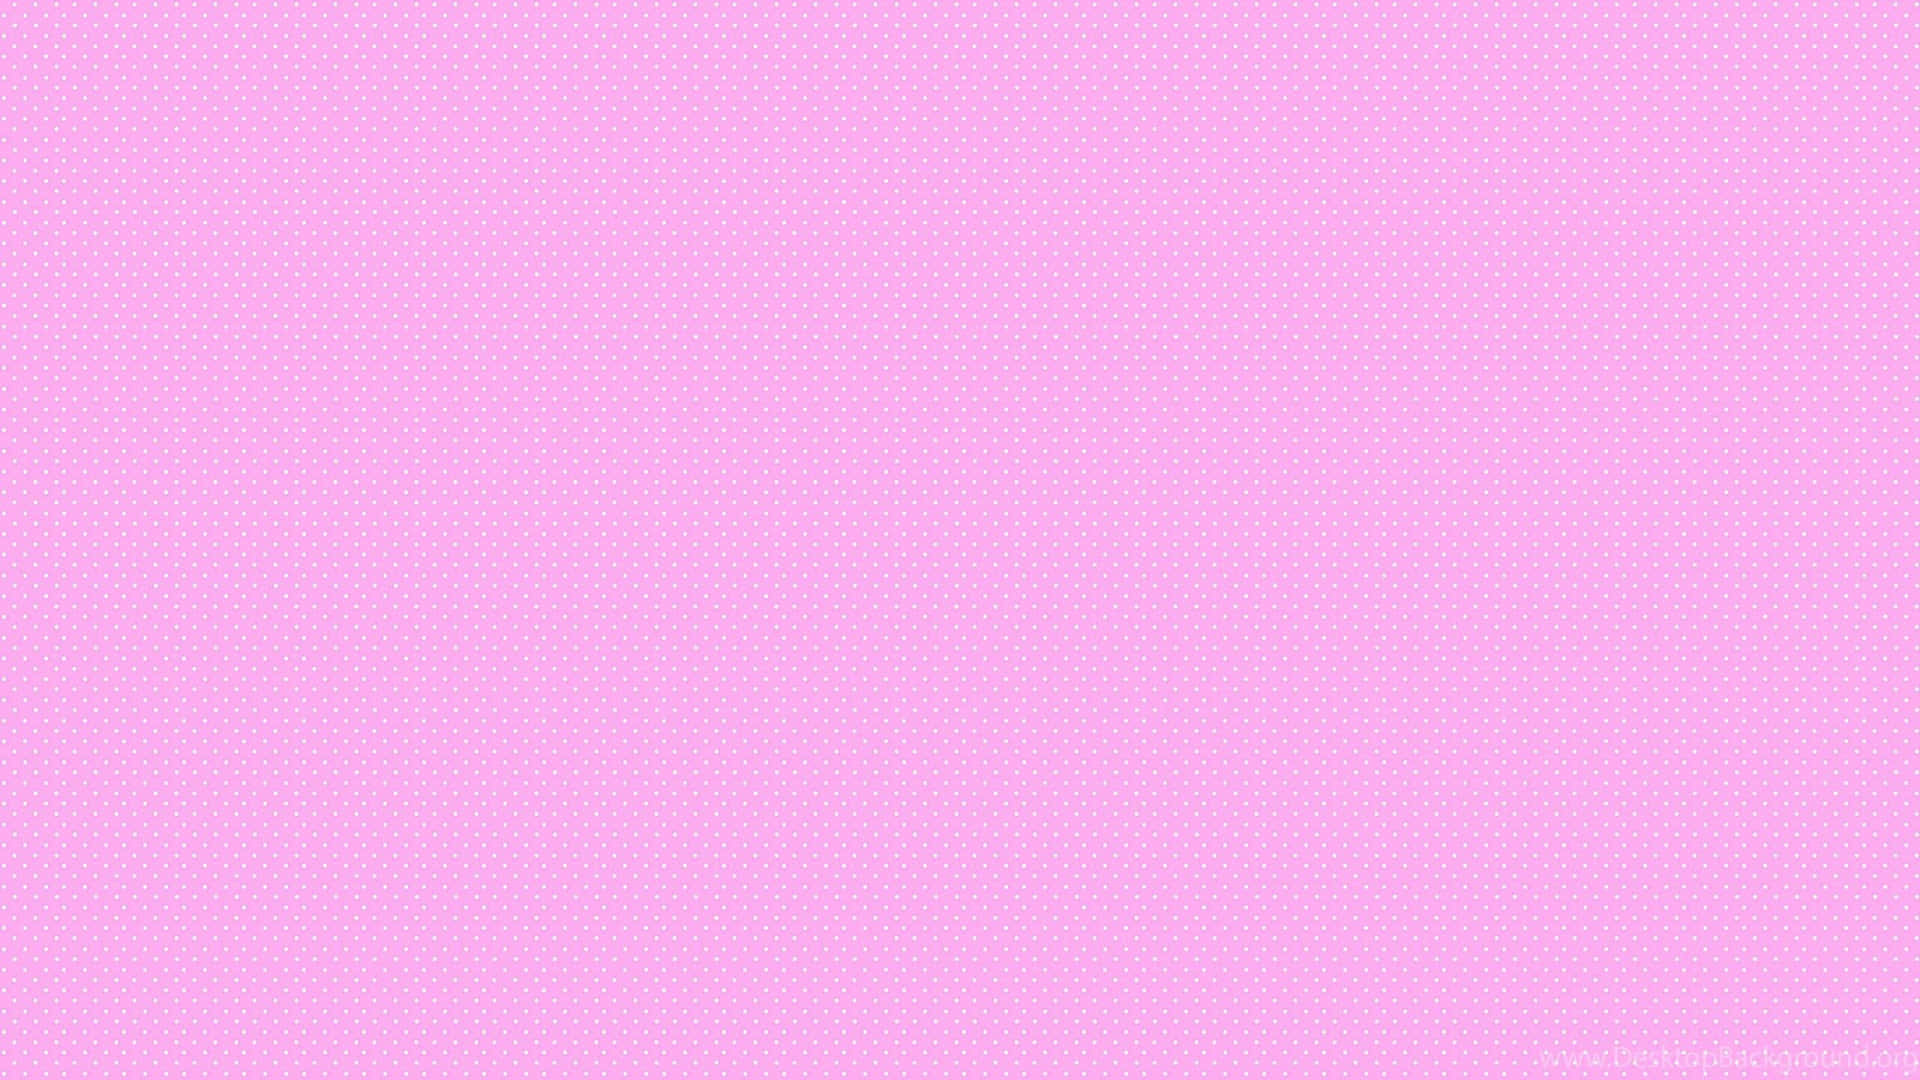 100+] Plain Pink Background s | Wallpapers.com